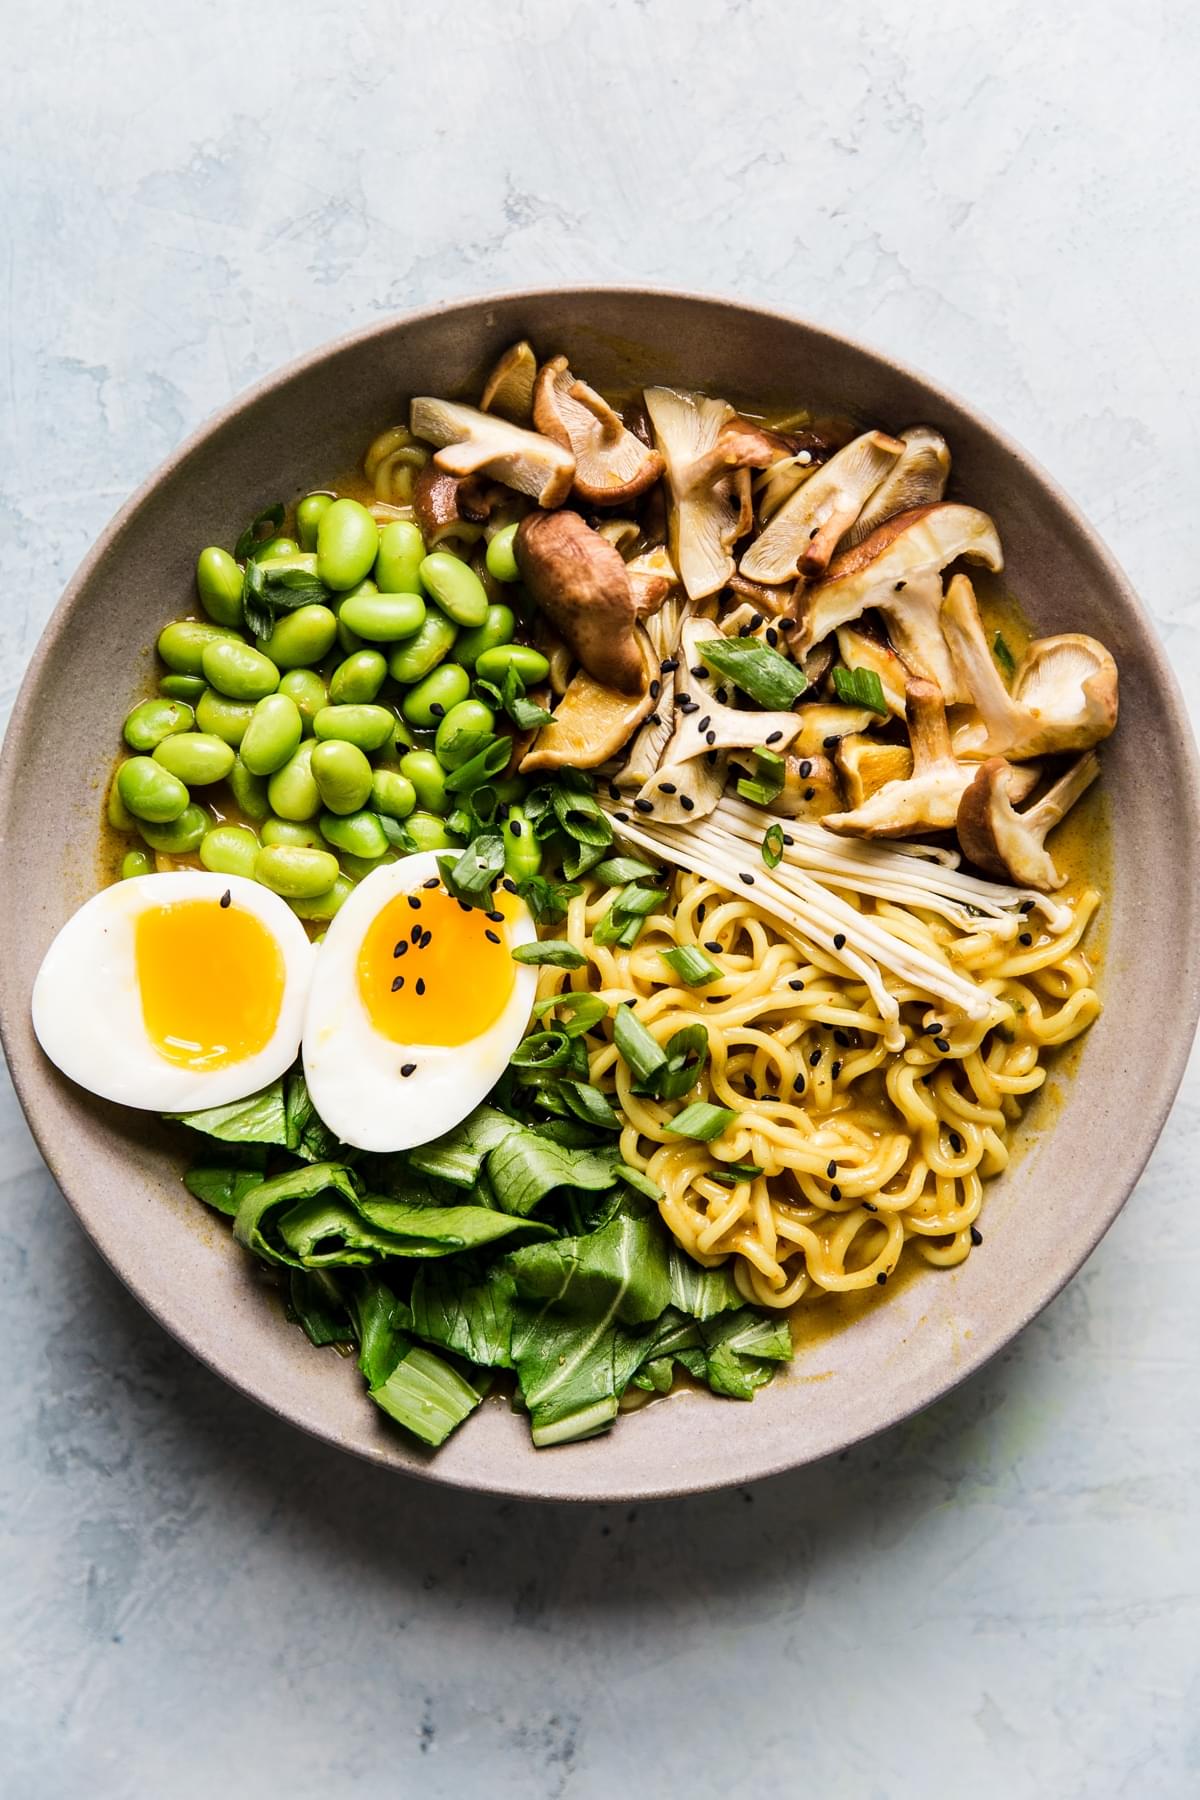 Bowl of vegetarian coconut curry ramen with mushrooms, bok choy, edamame and soft boiled egg